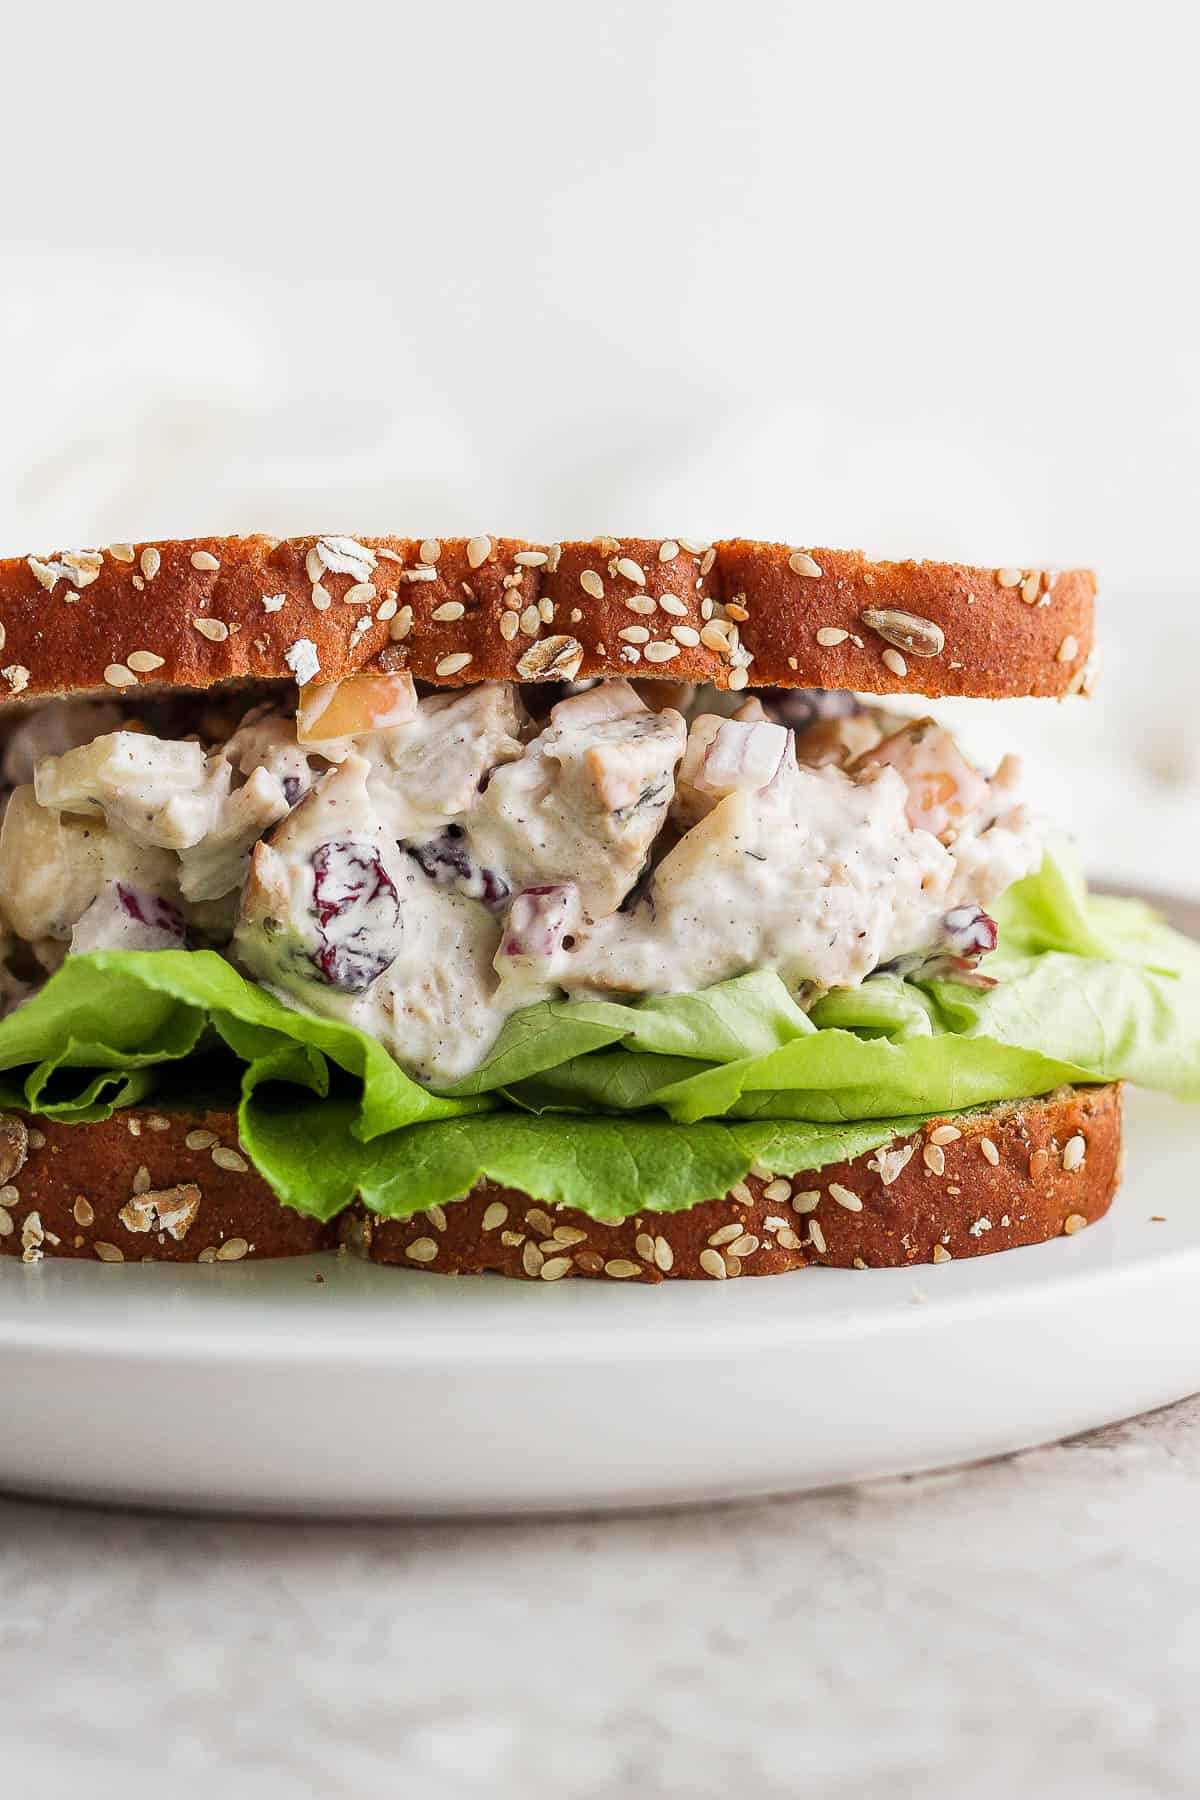 Turkey salad as a sandwich with some lettuce.